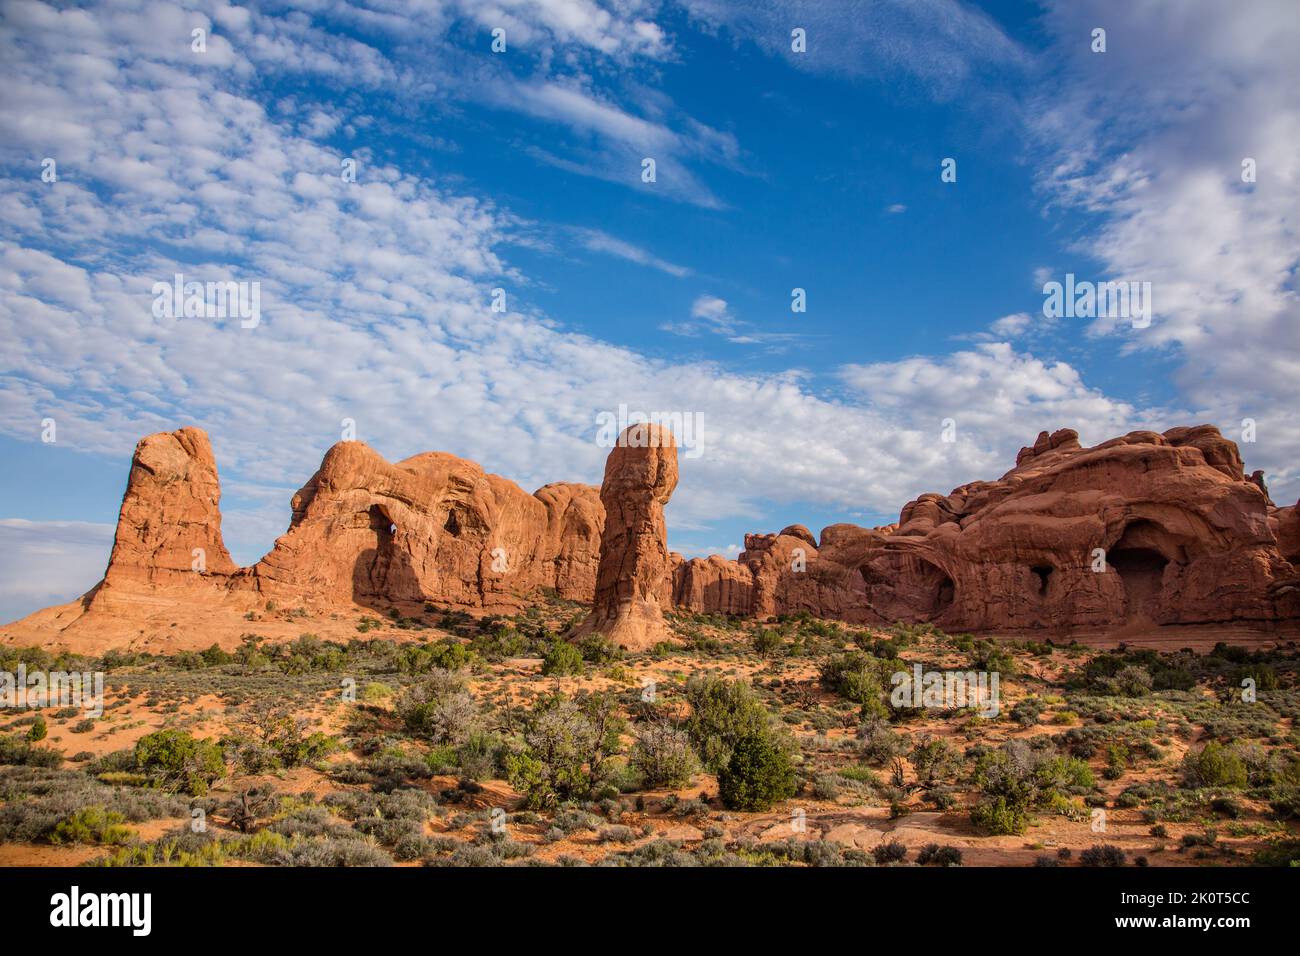 A sandstone rock spire with Double Arch, center, in the Windows Section of Arches National Park, Moab, Utah. Stock Photo